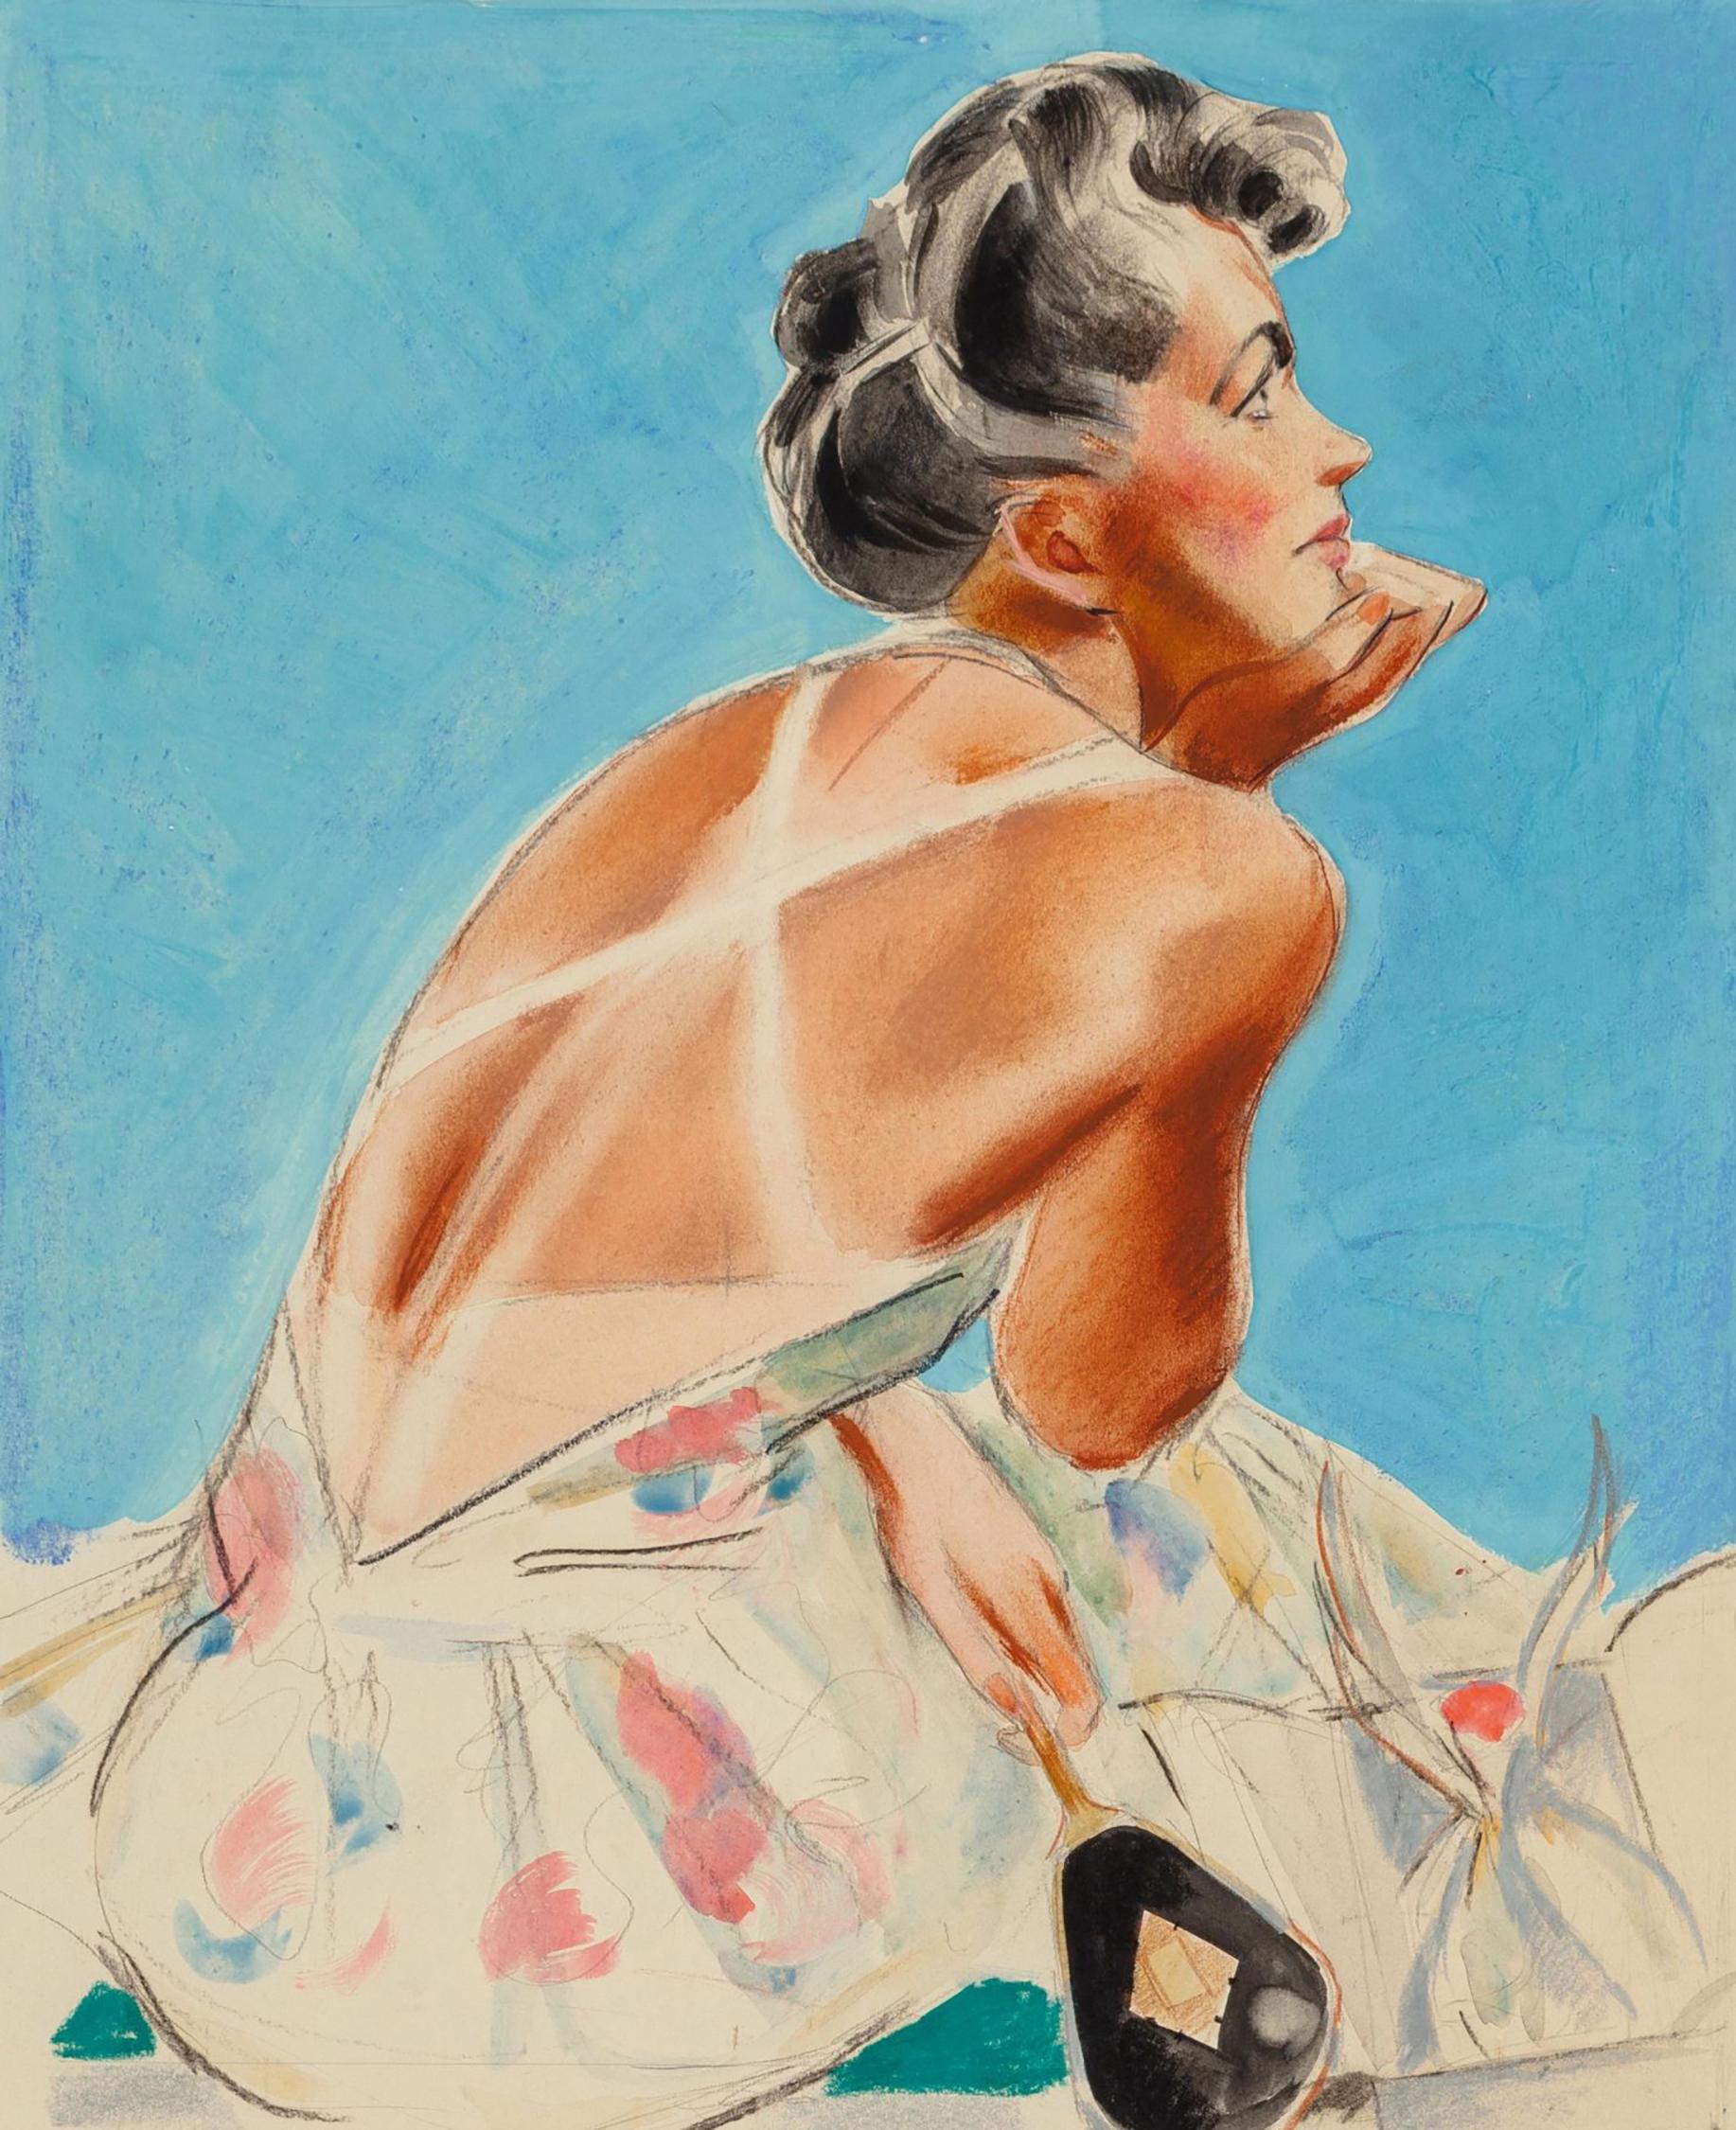 Tan Lines, The Saturday Evening Post cover study - Mixed Media Art by Albert Hampson